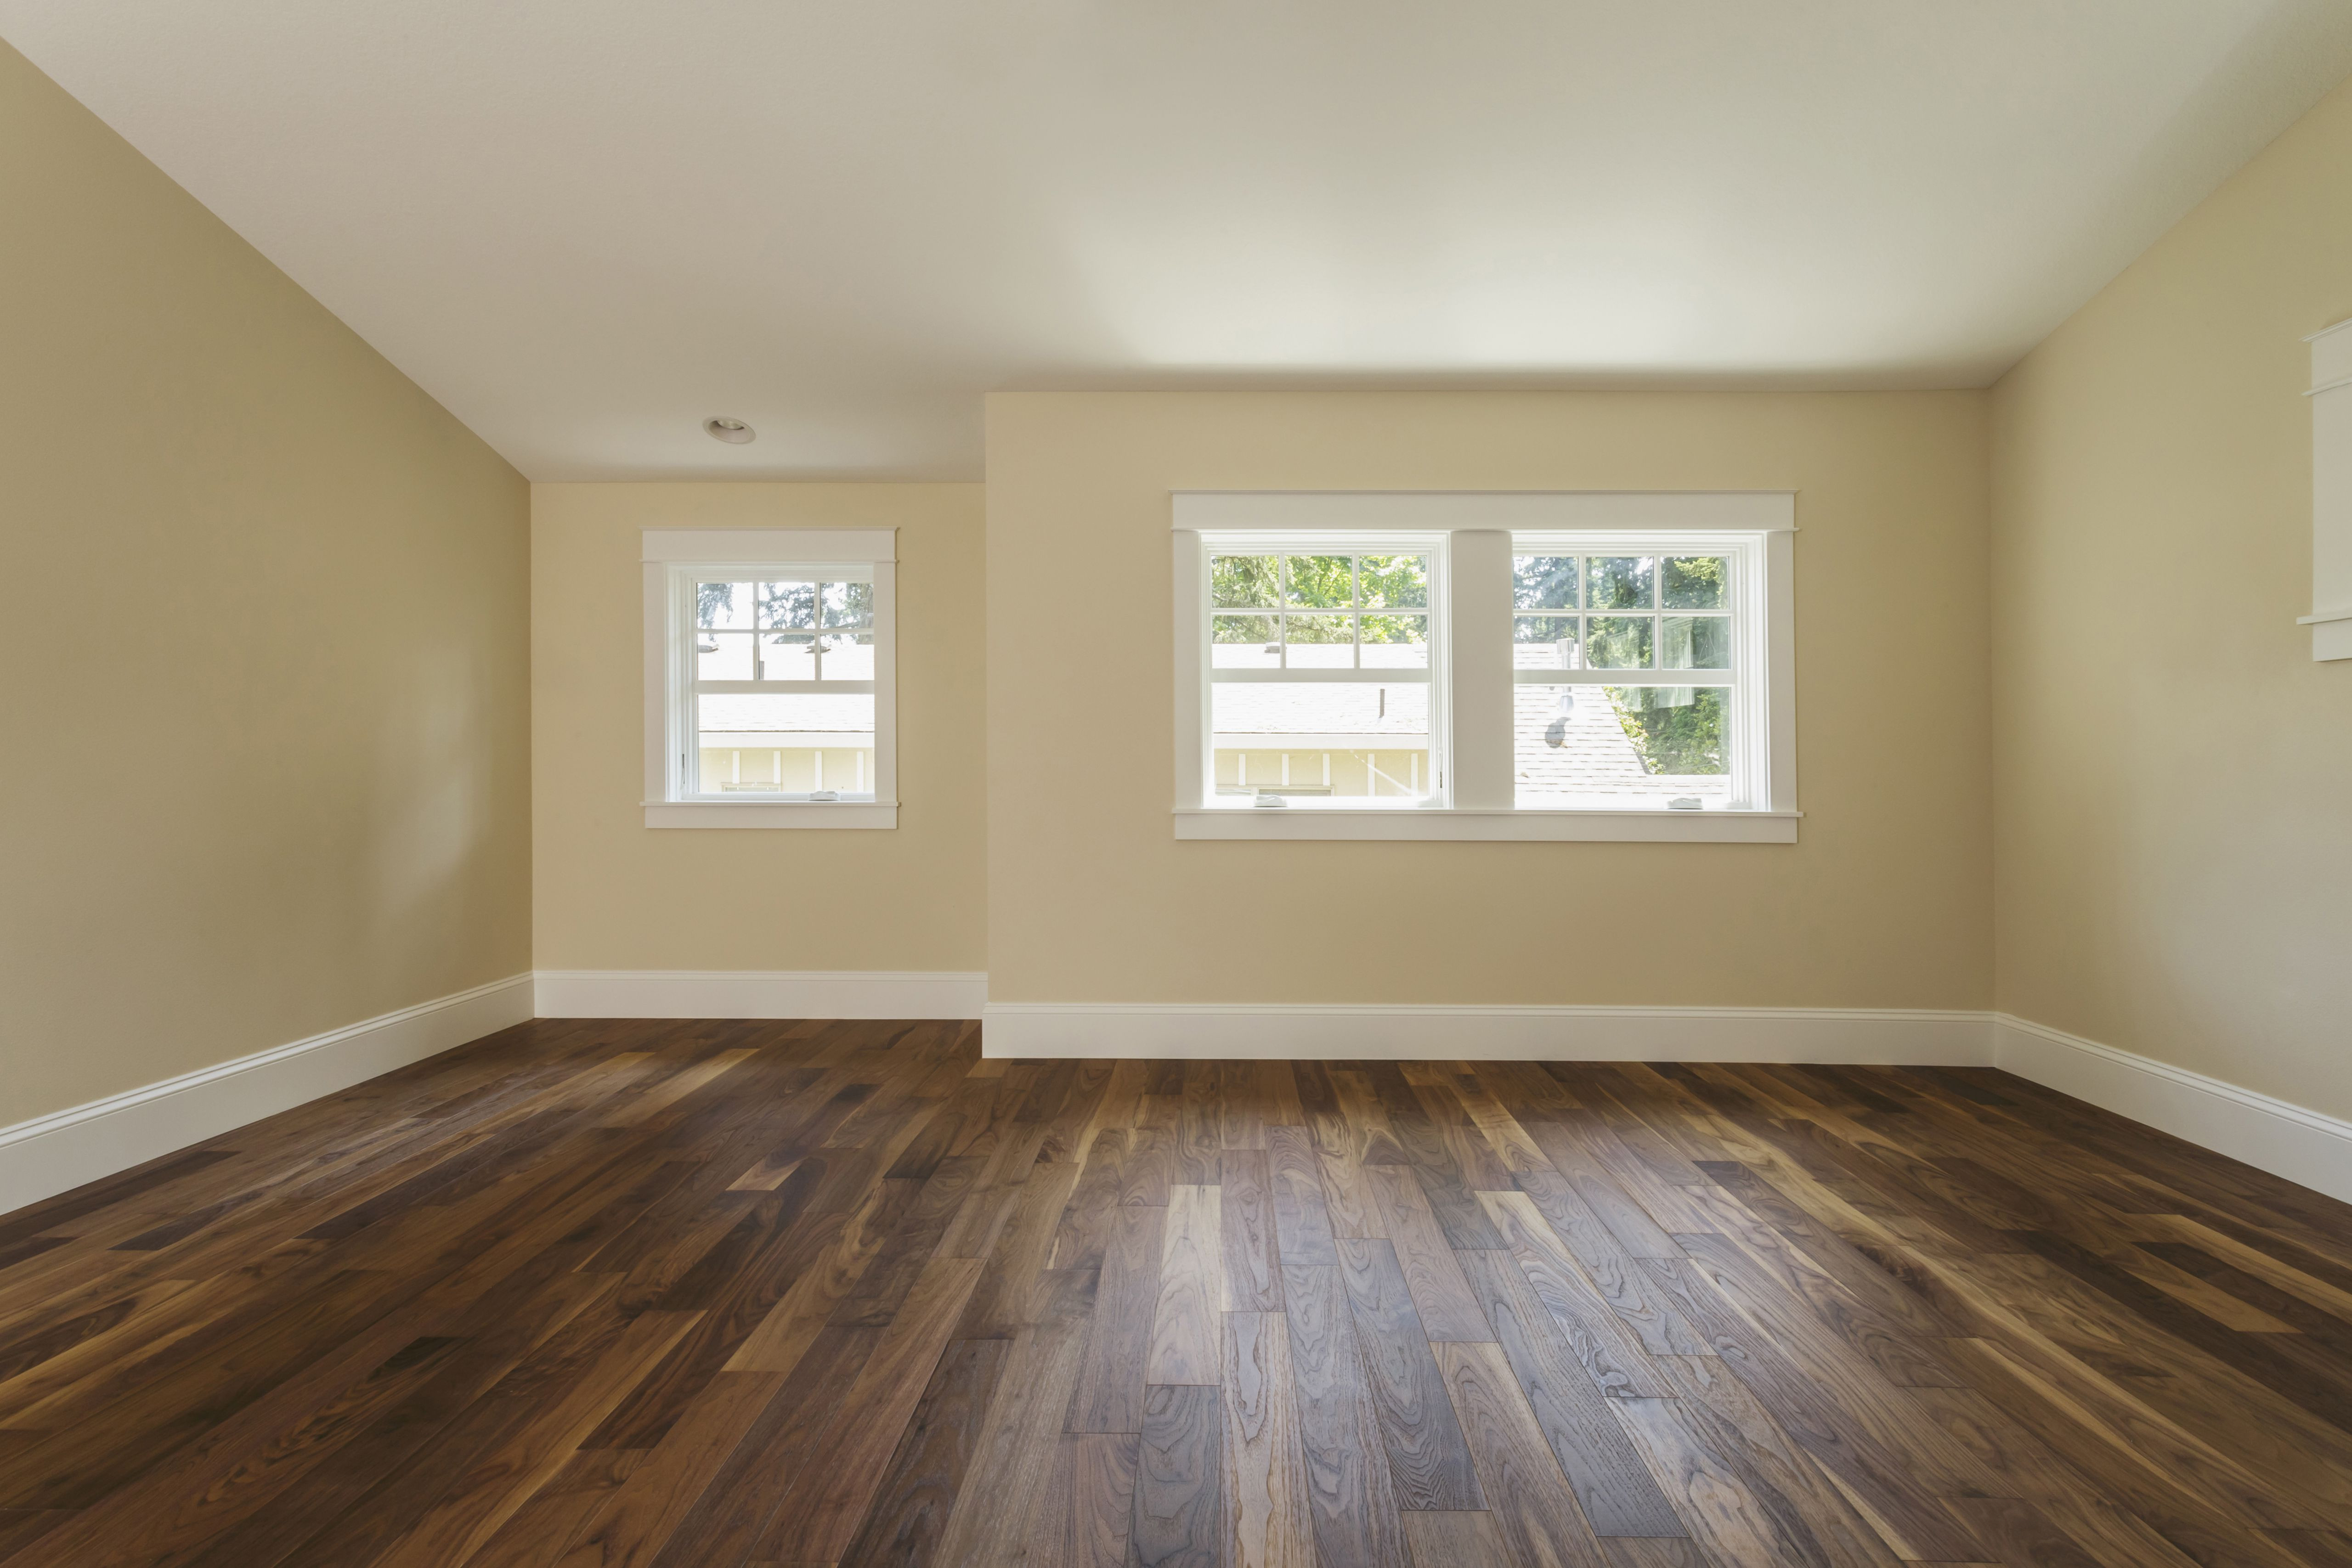 29 Lovely How to Install Floating Hardwood Floors 2024 free download how to install floating hardwood floors of its easy and fast to install plank vinyl flooring for wooden floor in empty bedroom 482143001 588bd5f45f9b5874eebd56e9